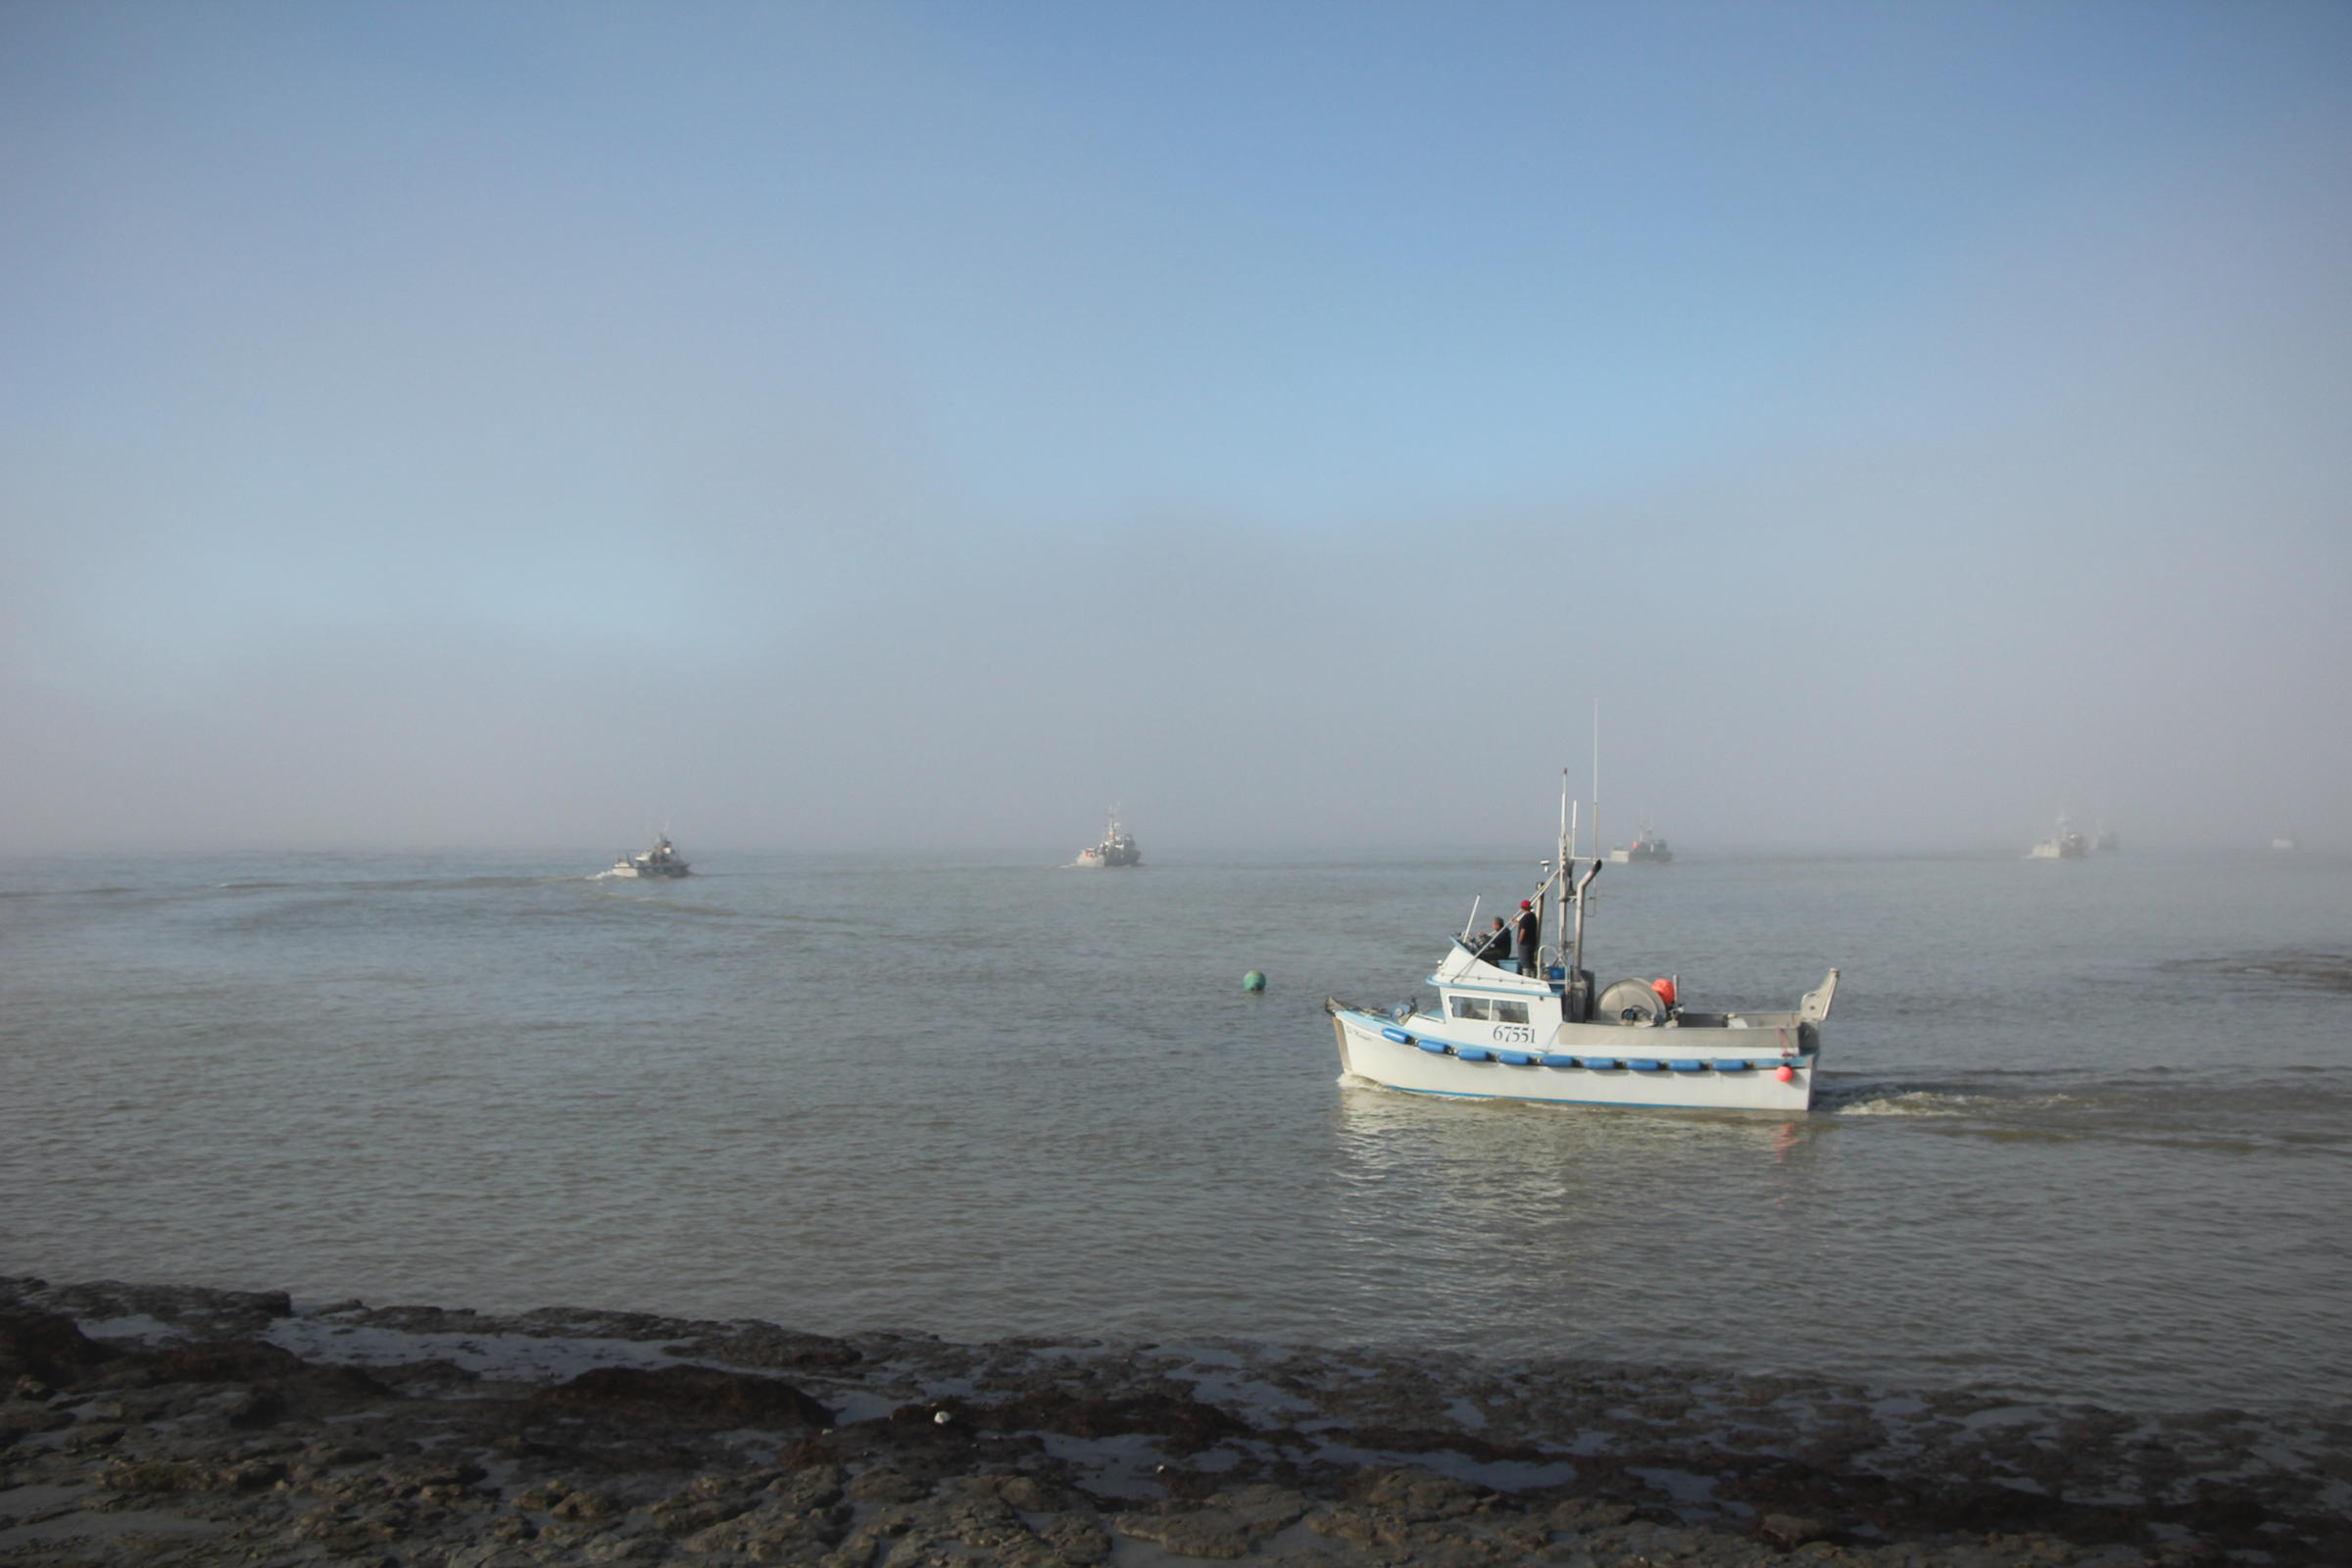 Boats leave Dillingham to fish the Nushagak District in June 2016. The story of Bristol Bay's harvesters and fishing communities will be key to the new Bristol Bay sockeye branding effort, which will launch in Boulder this fall. (Photo by Cate Gomez, KDLG - Dillingham)